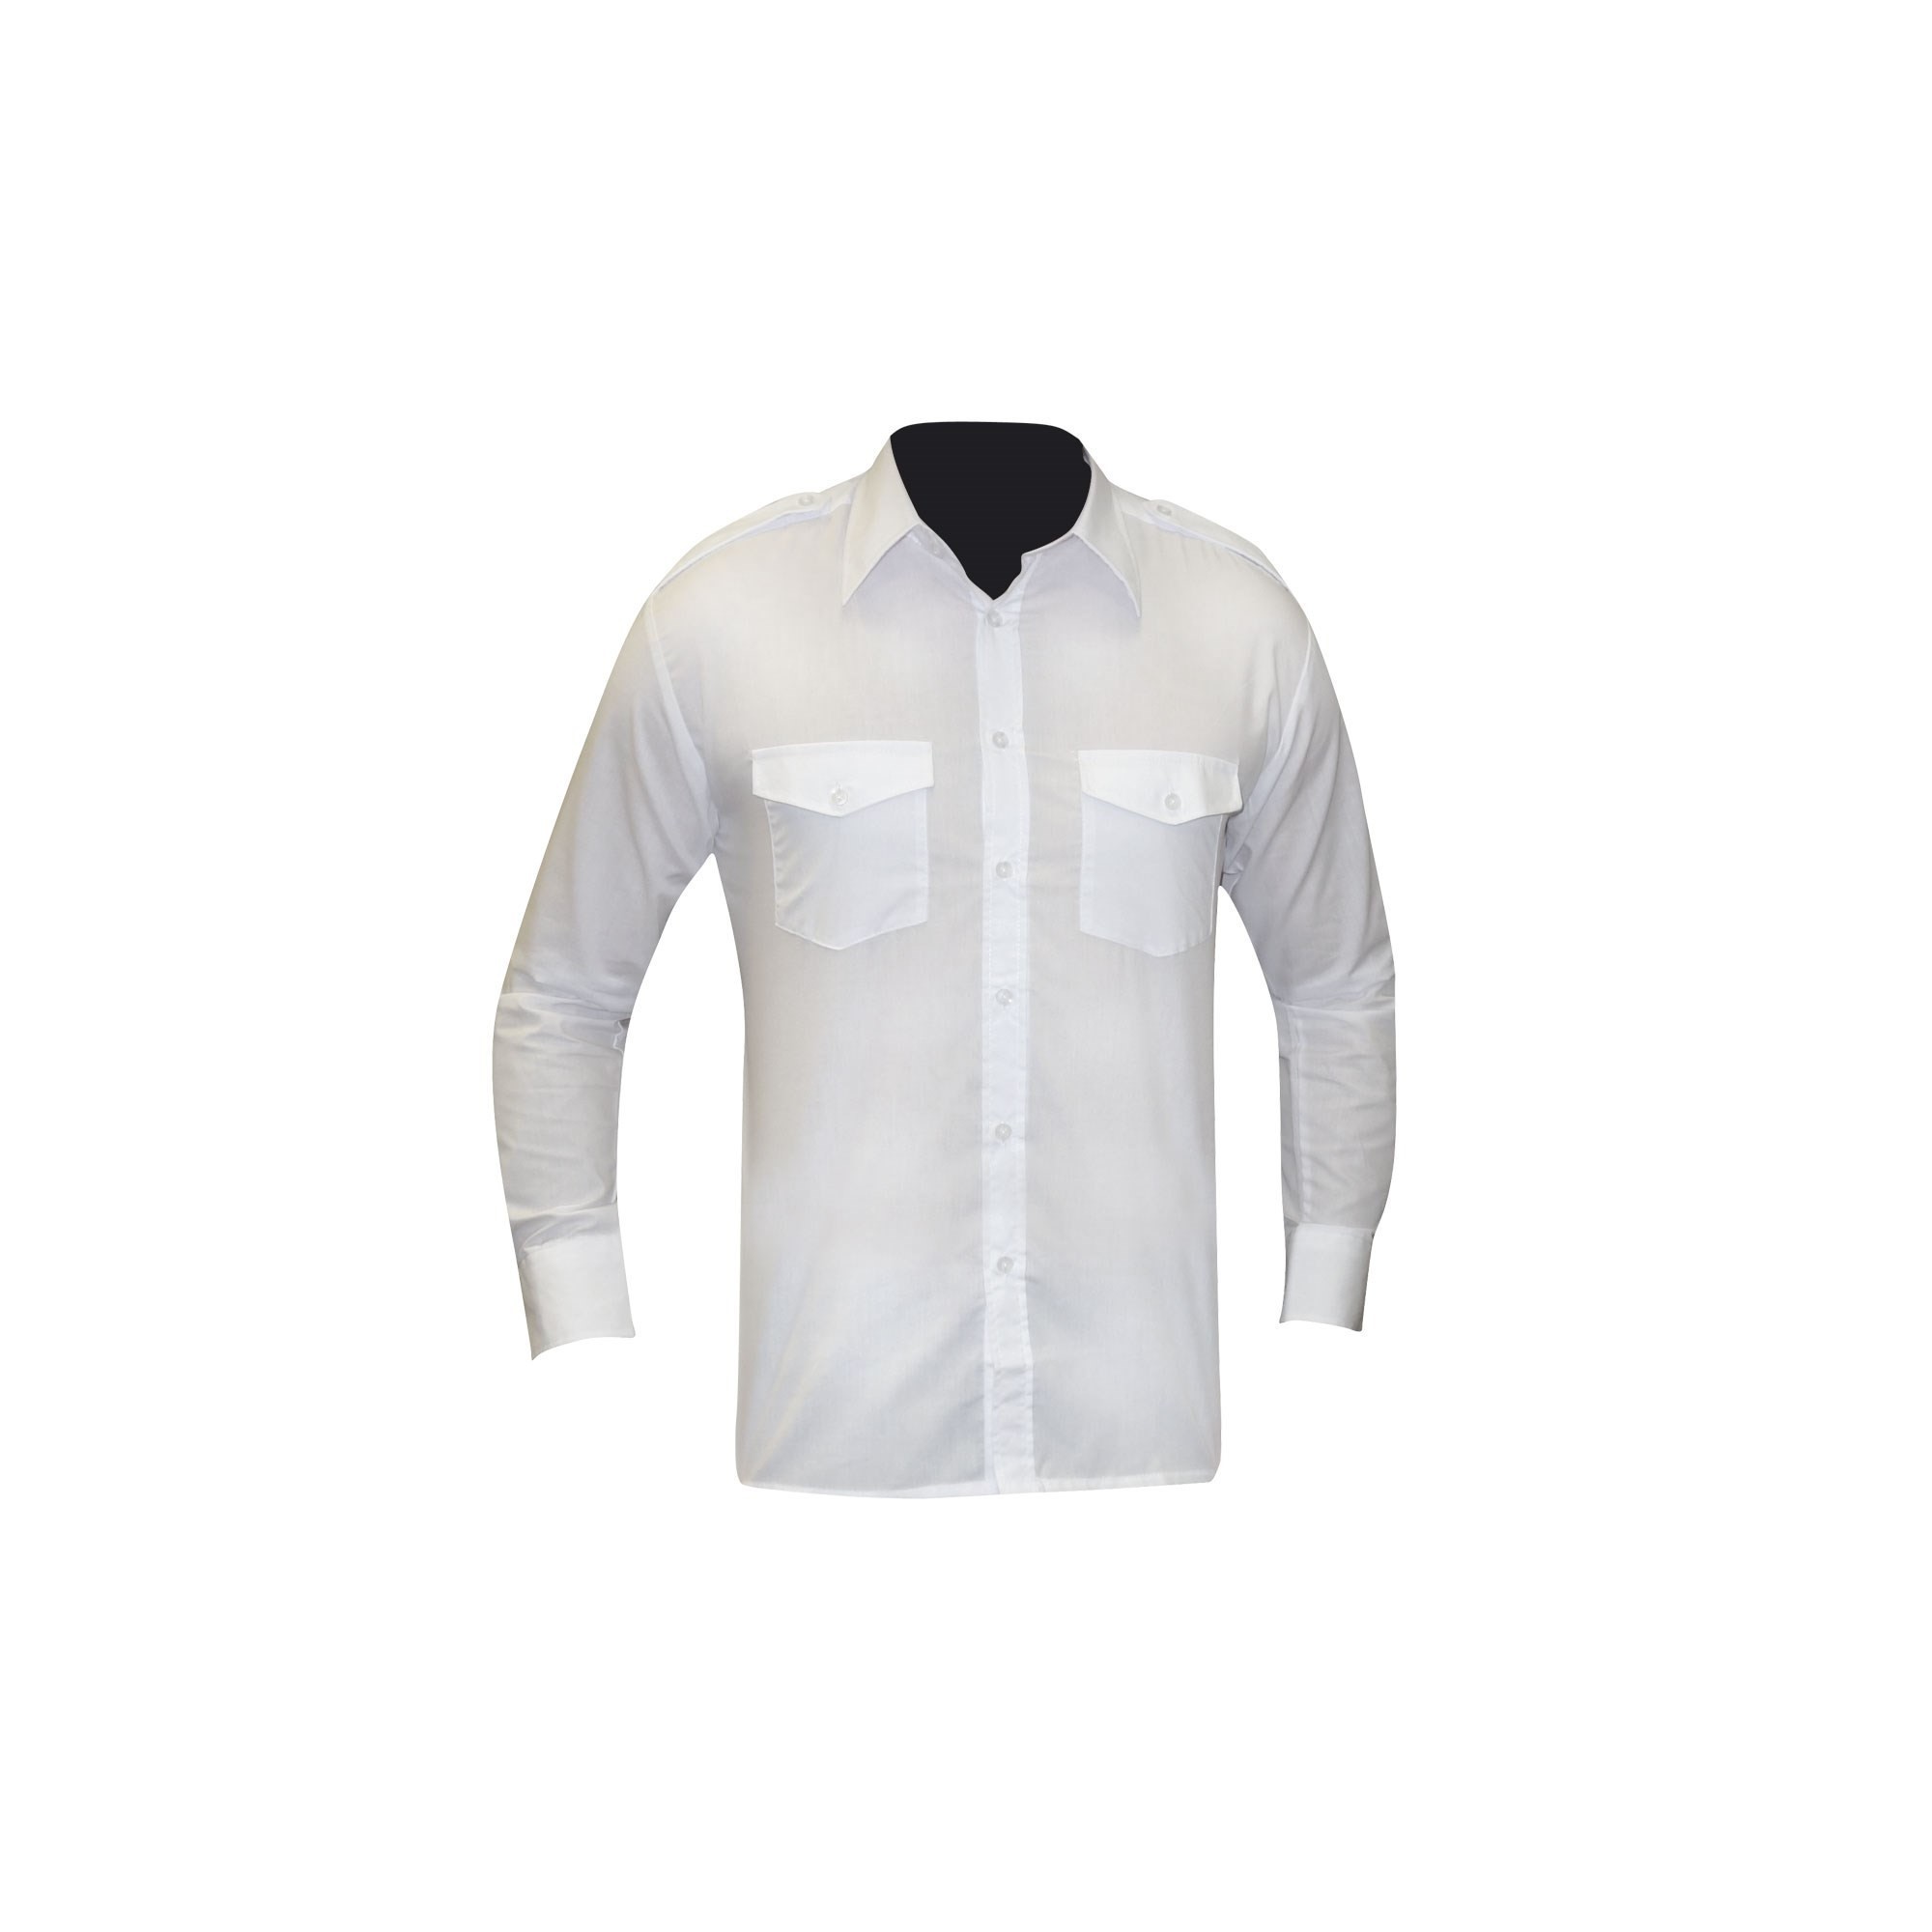 CHEMISE PILOTE BLANCHE MANCHES LONGUES